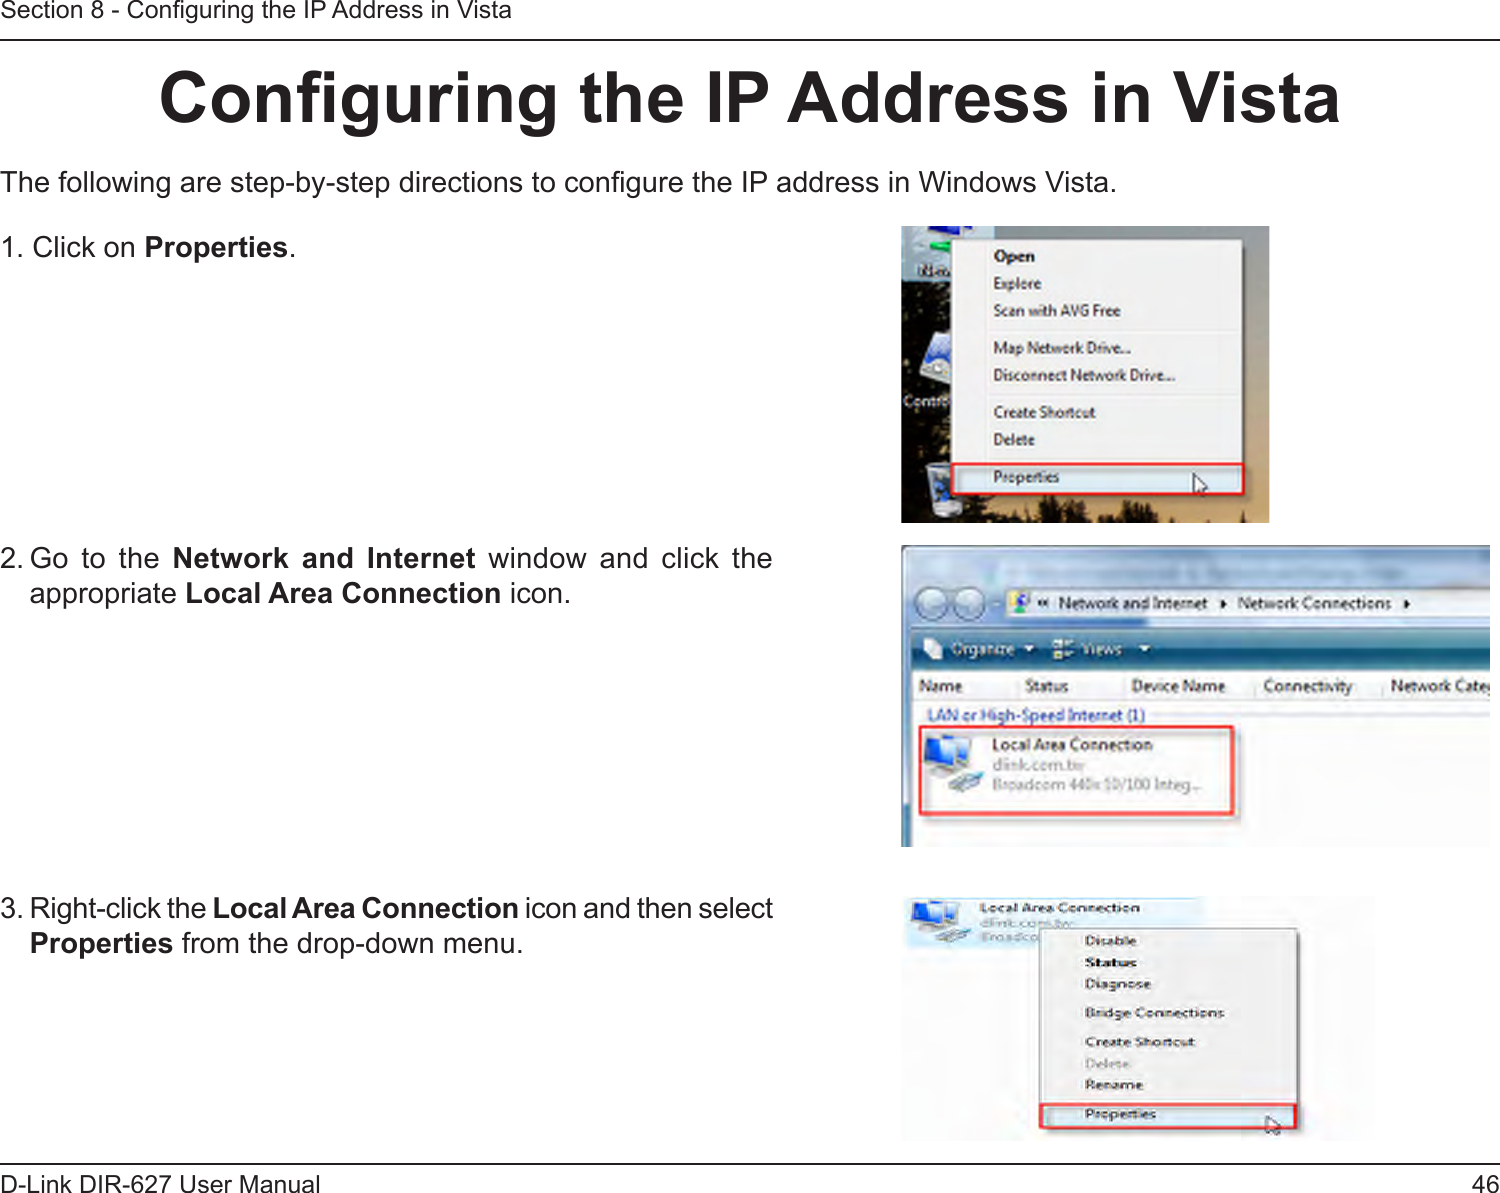 46D-Link DIR-627 User ManualSection 8 - Conguring the IP Address in VistaConguringtheIPAddressinVistaThe following are step-by-step directions to congure the IP address in Windows Vista.2. Go  to  the  Network and Internet  window  and  click  the appropriate LocalAreaConnection icon. 1. Click on Properties.3. Right-click the LocalAreaConnection icon and then select Properties from the drop-down menu. 